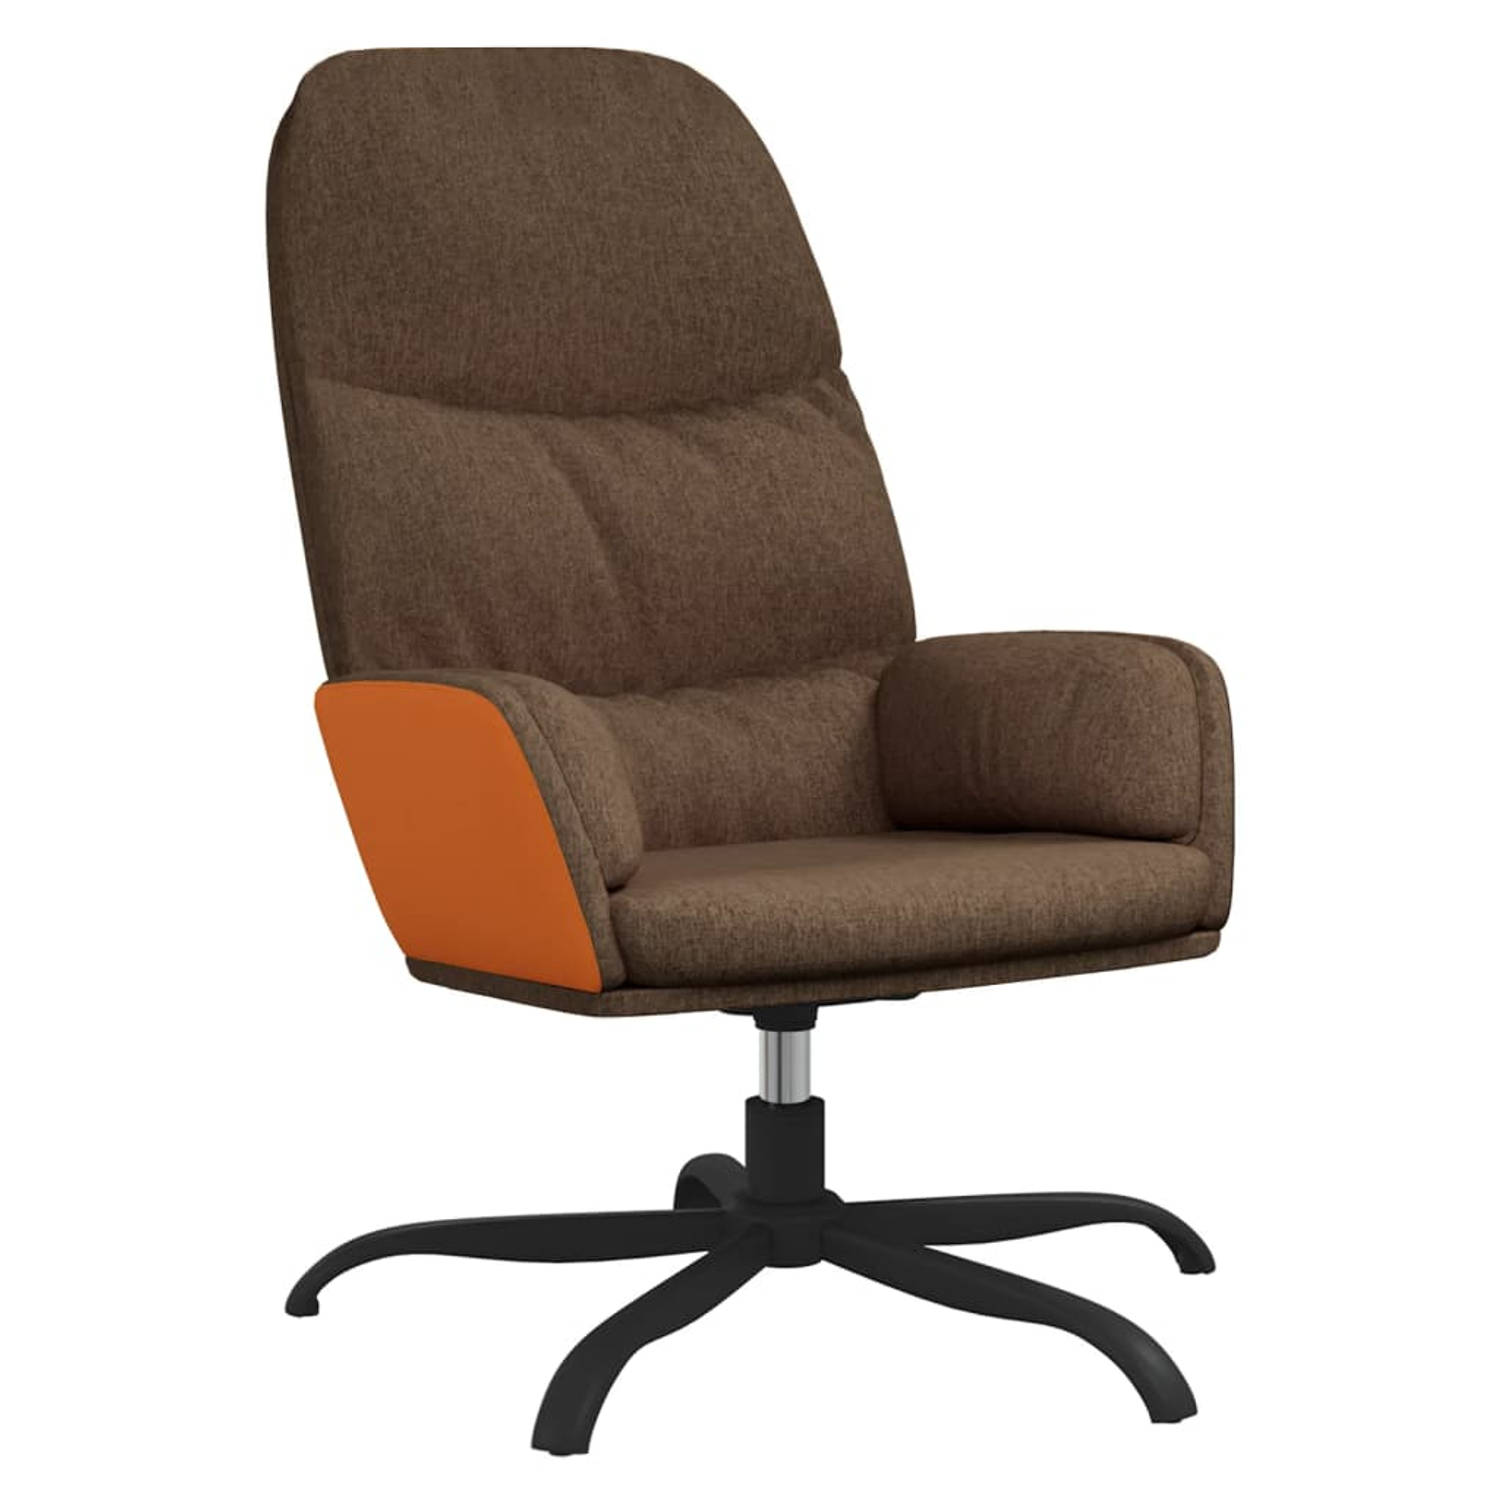 The Living Store Relaxstoel stof bruin - Fauteuil